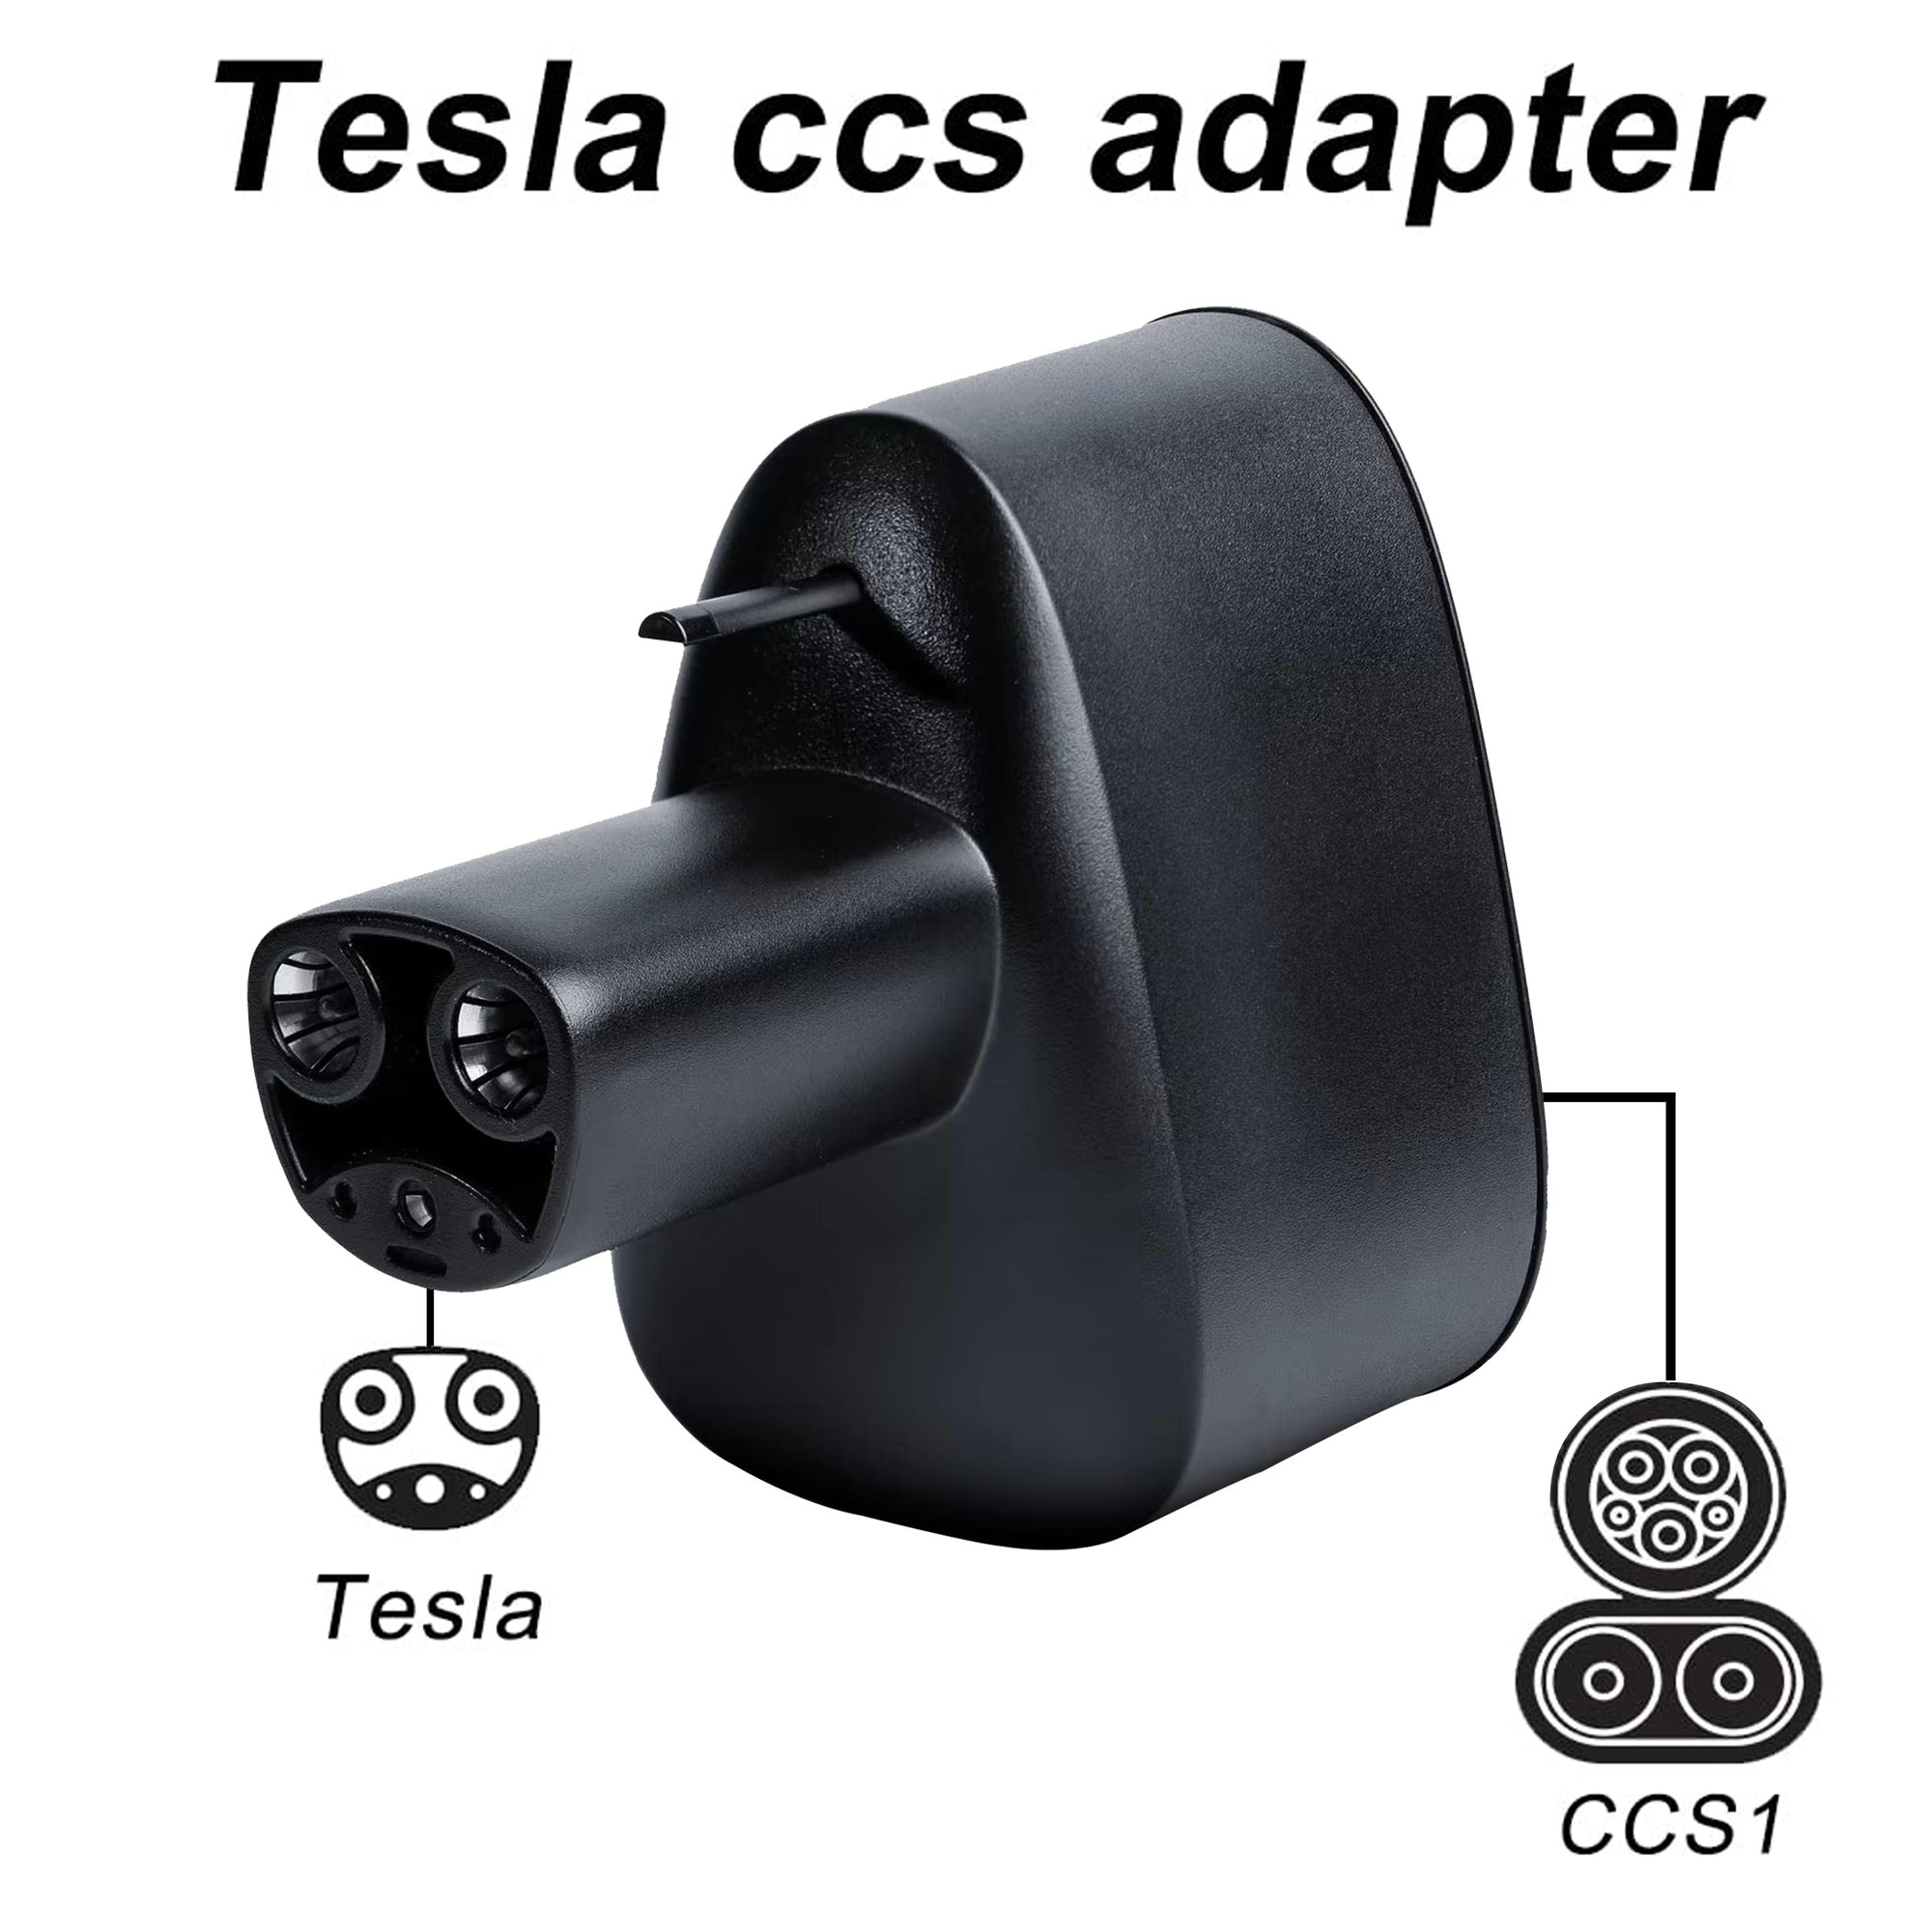 Tesla CCS Combo 1 Adapter CCS to Tesla For Model 3 Y X S 250KW Fast Charging on CCS